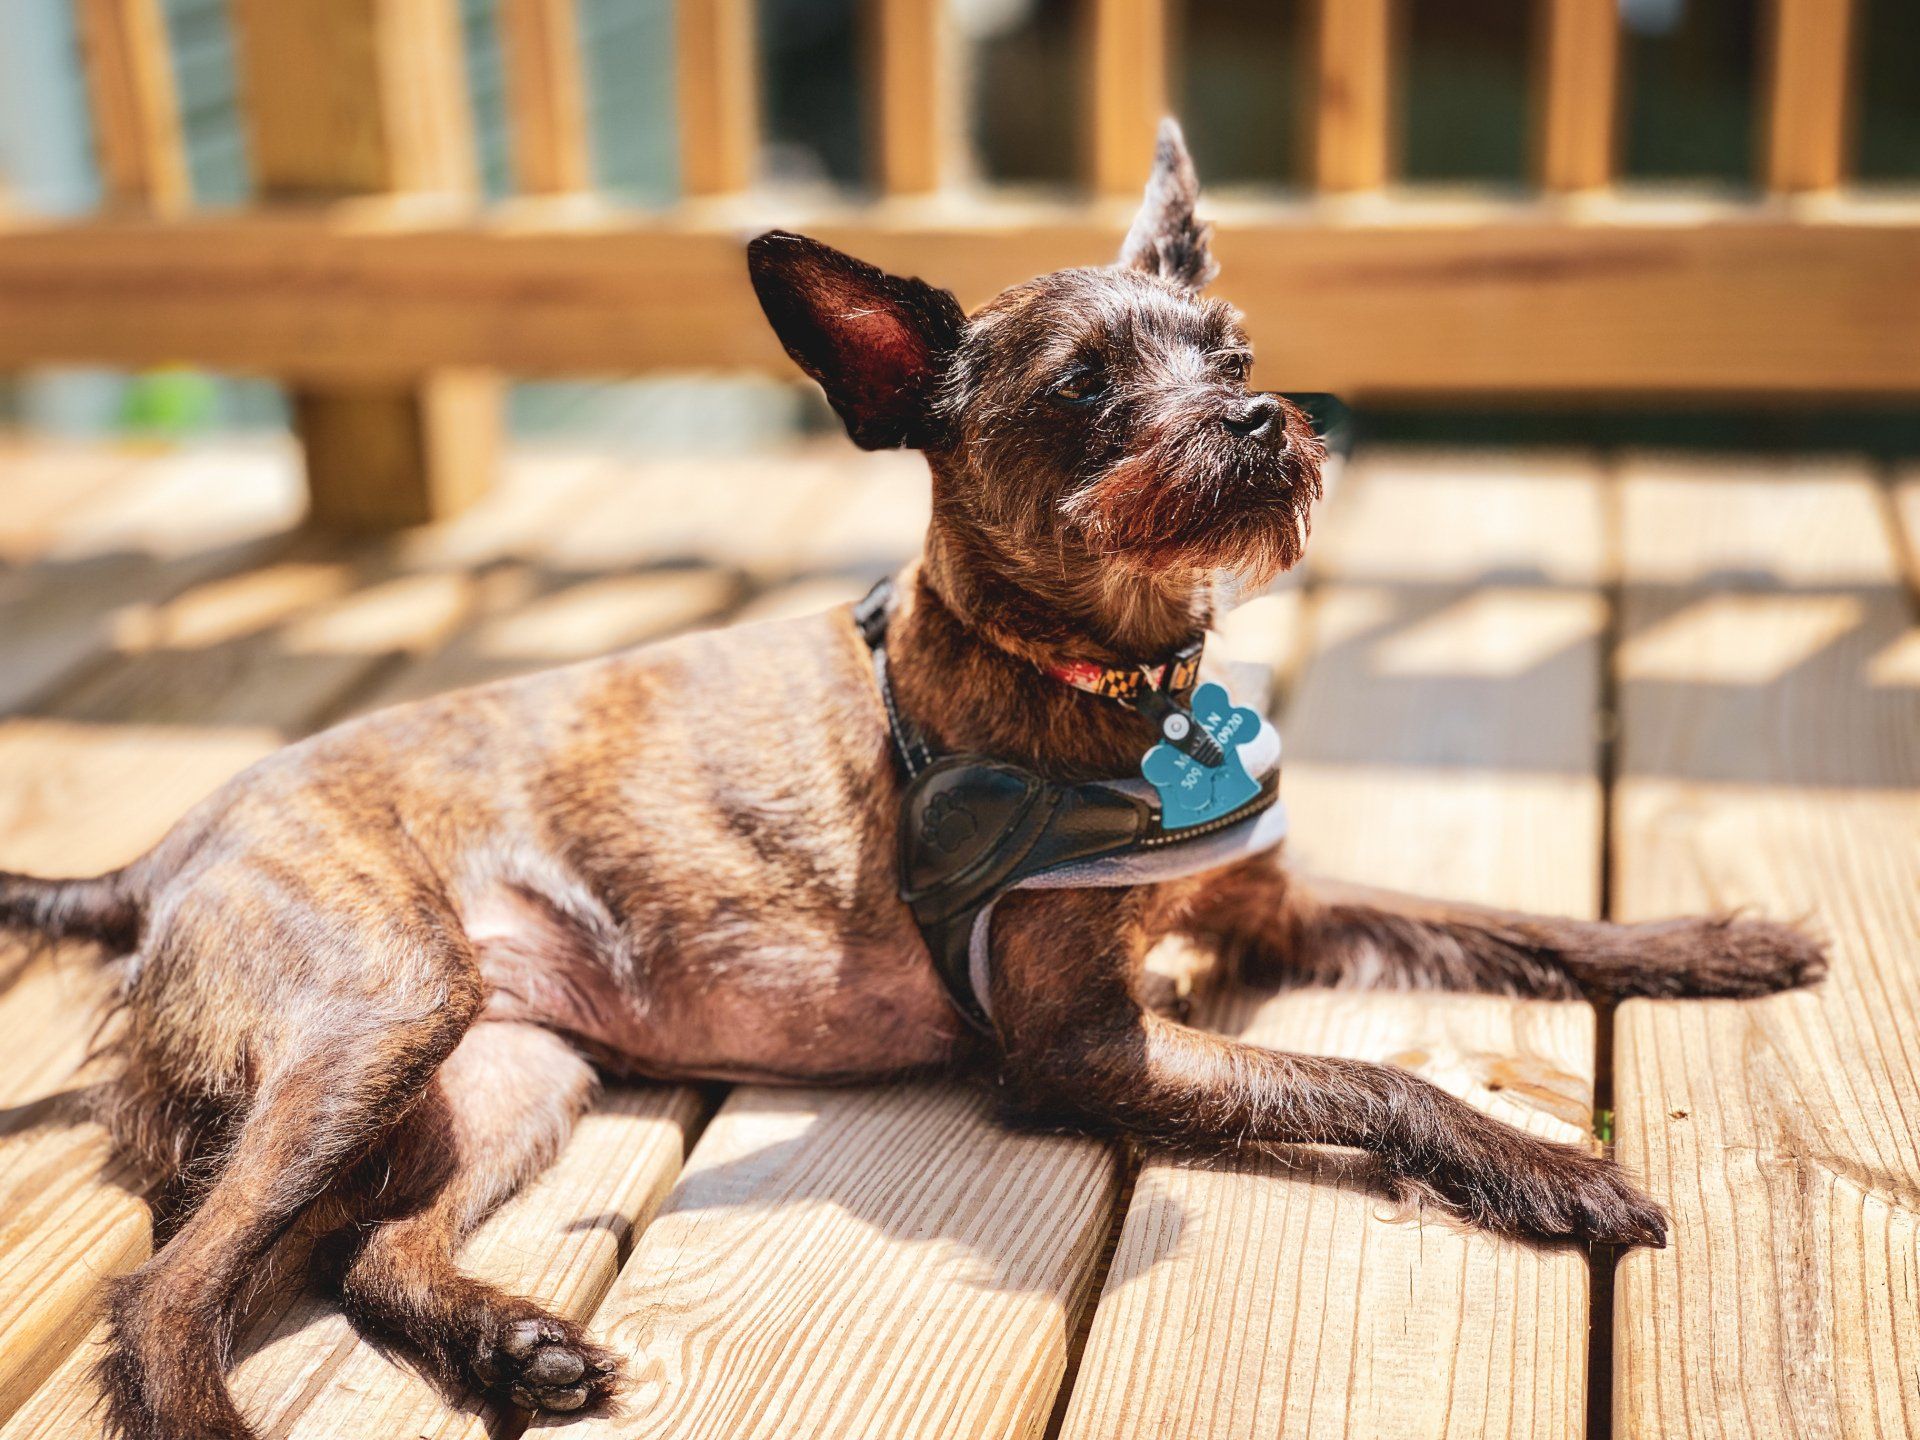 Image of a small dog on the back deck, sunbathing